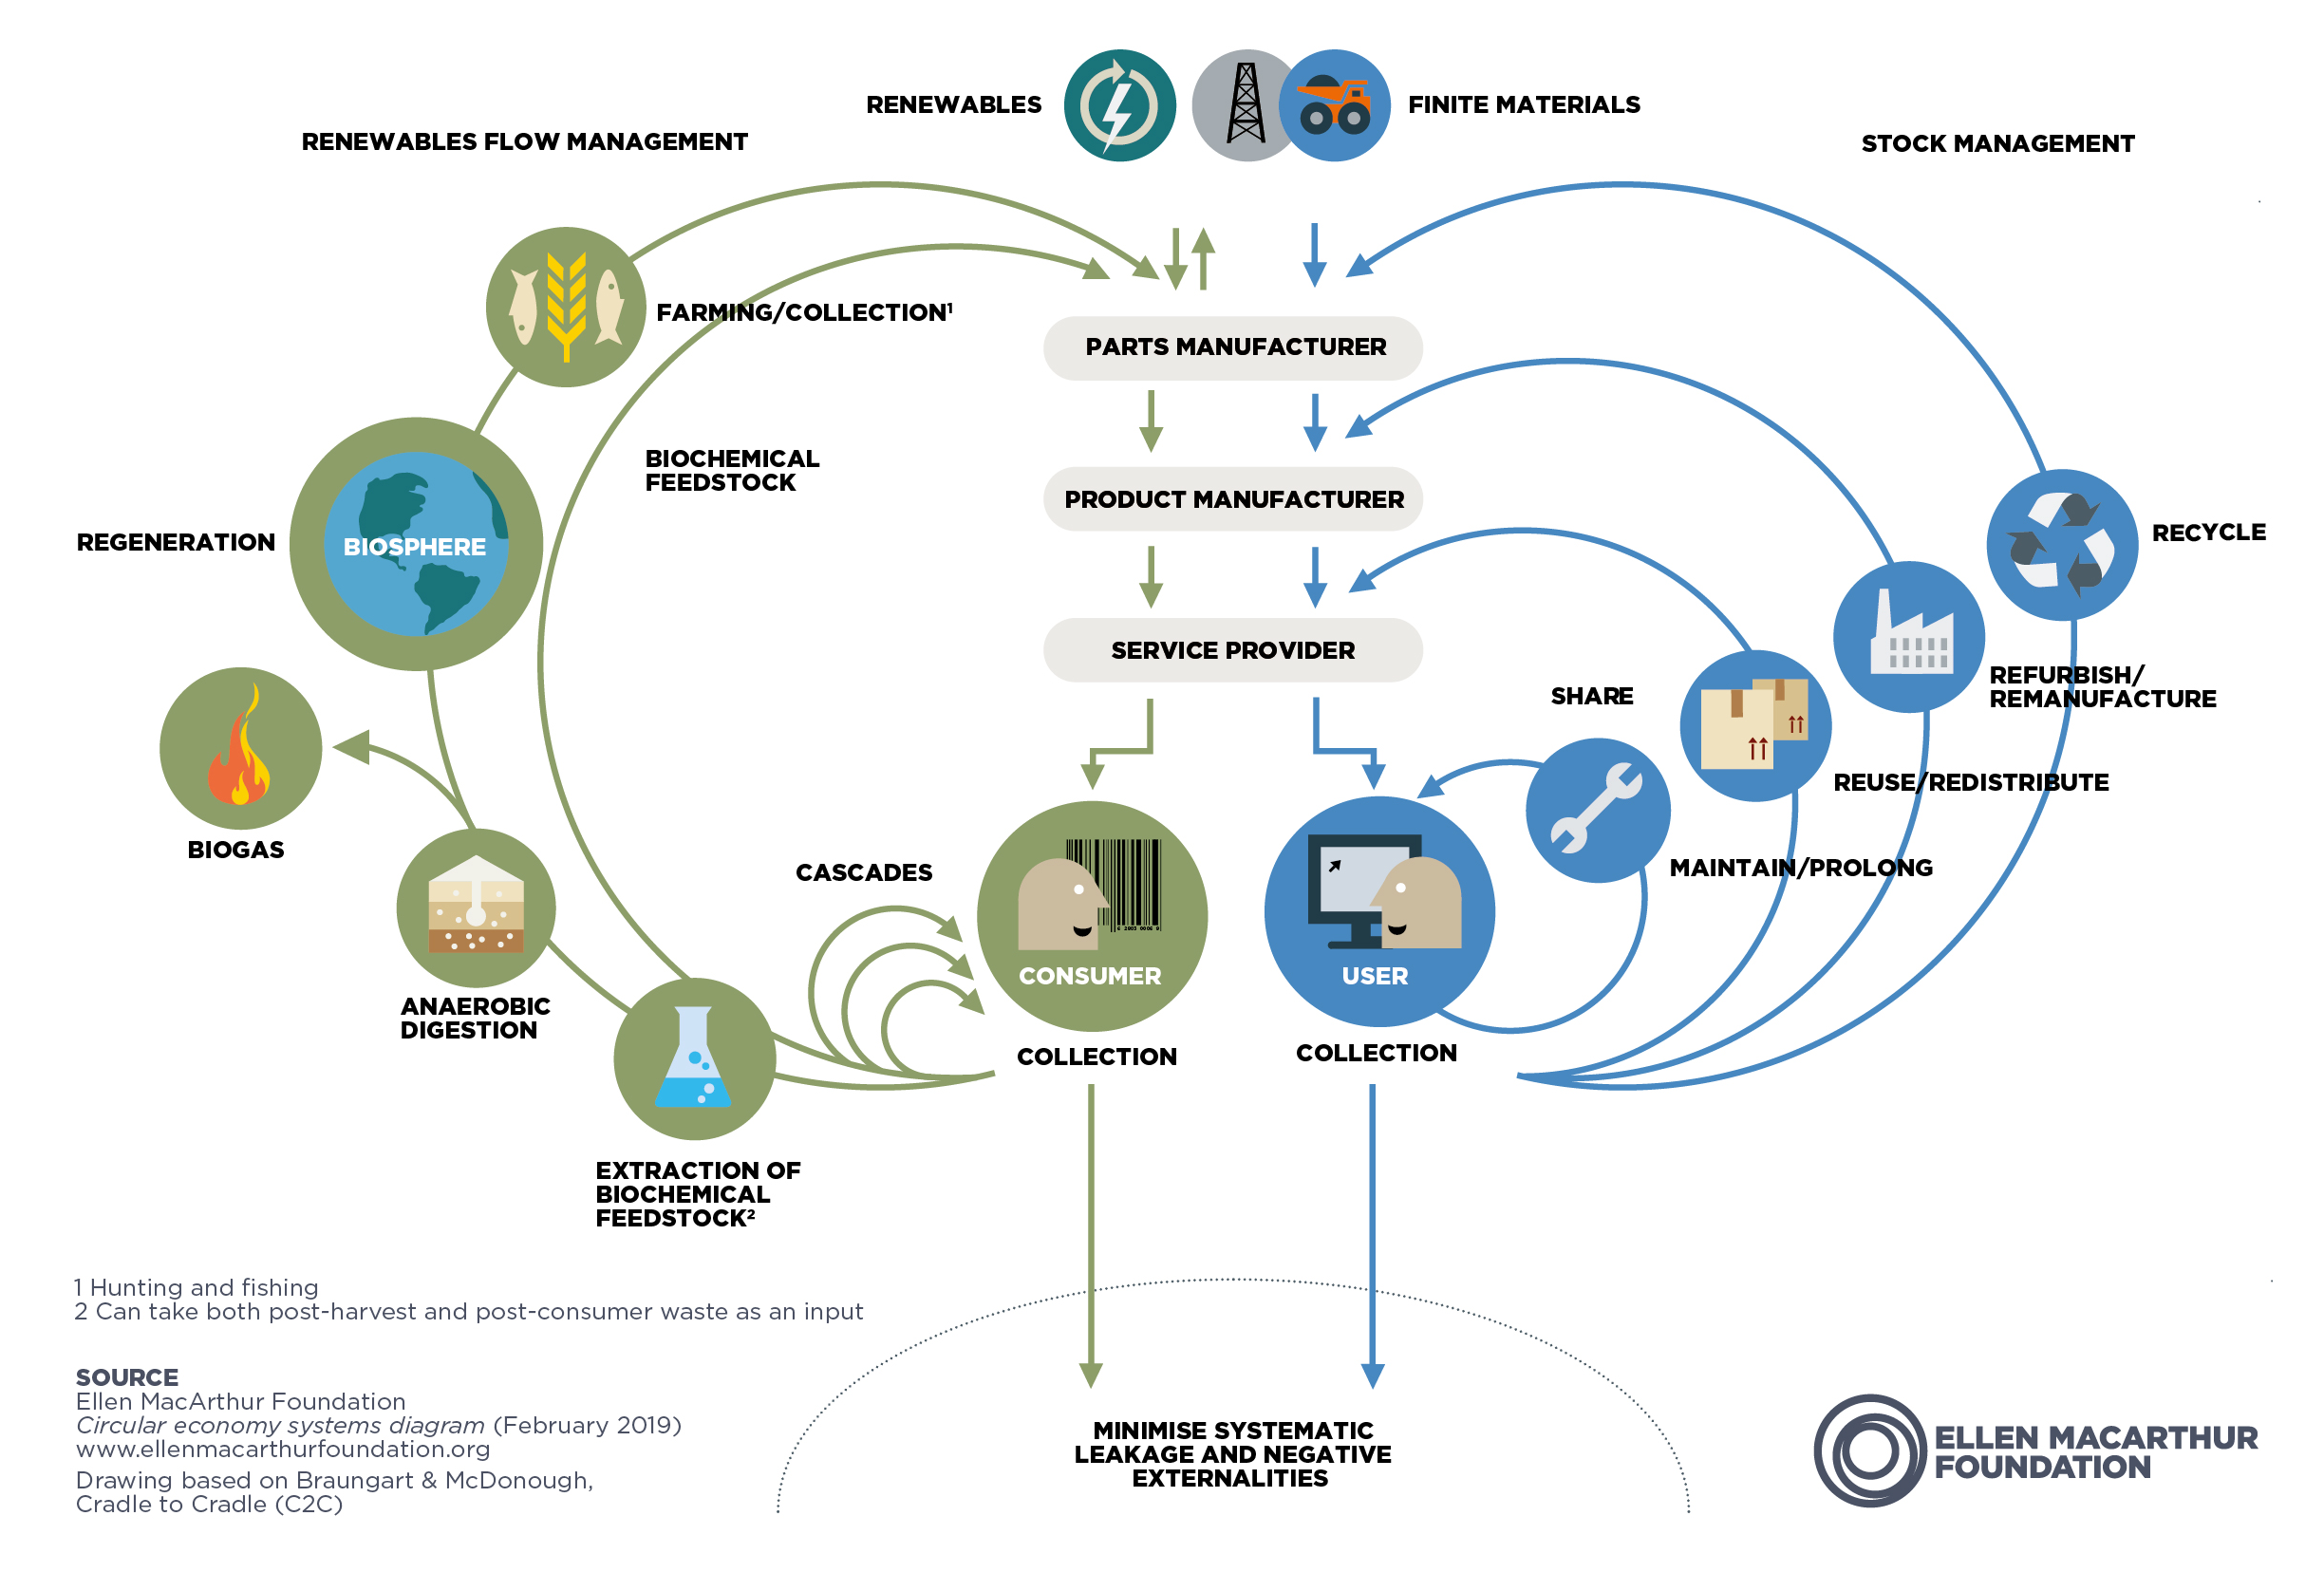 Circular Economy: A New Paradigm, Much More than Just the 3Rs 